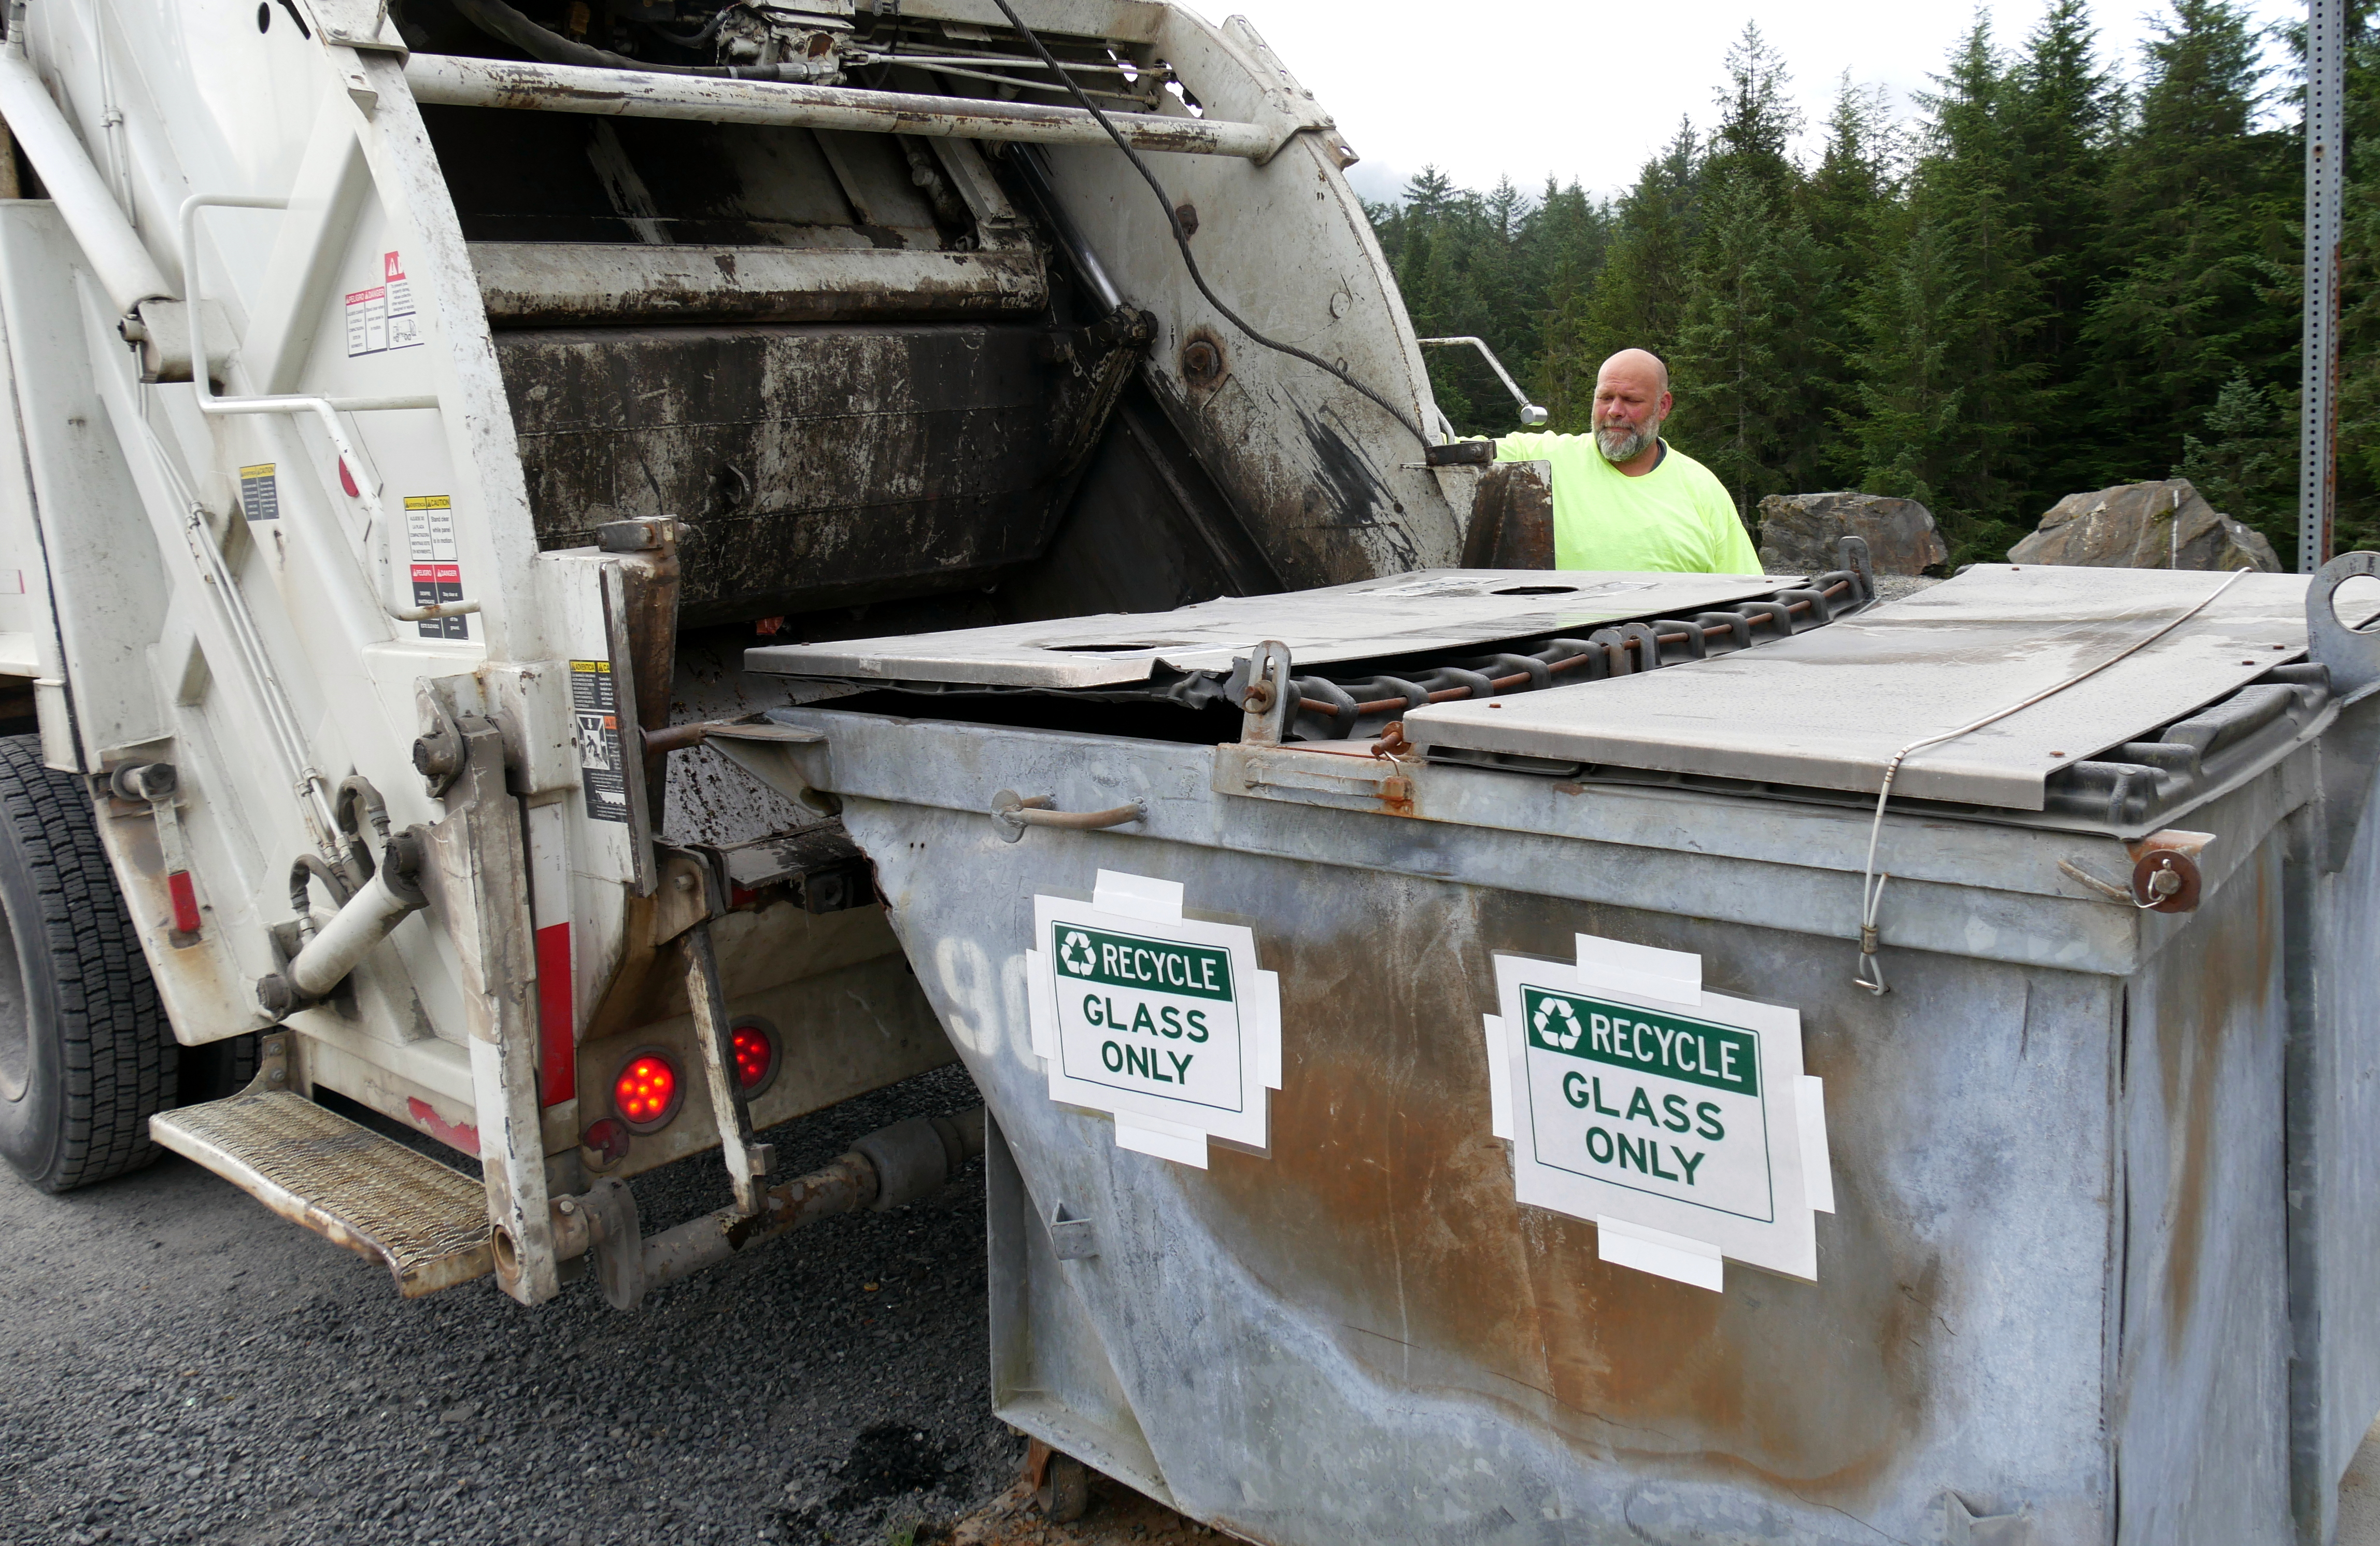 Petersburg Public Works employee, Kevin Granberg, loads glass into a dump truck to take to the landfill. (Photo by Angela Denning/KFSK)